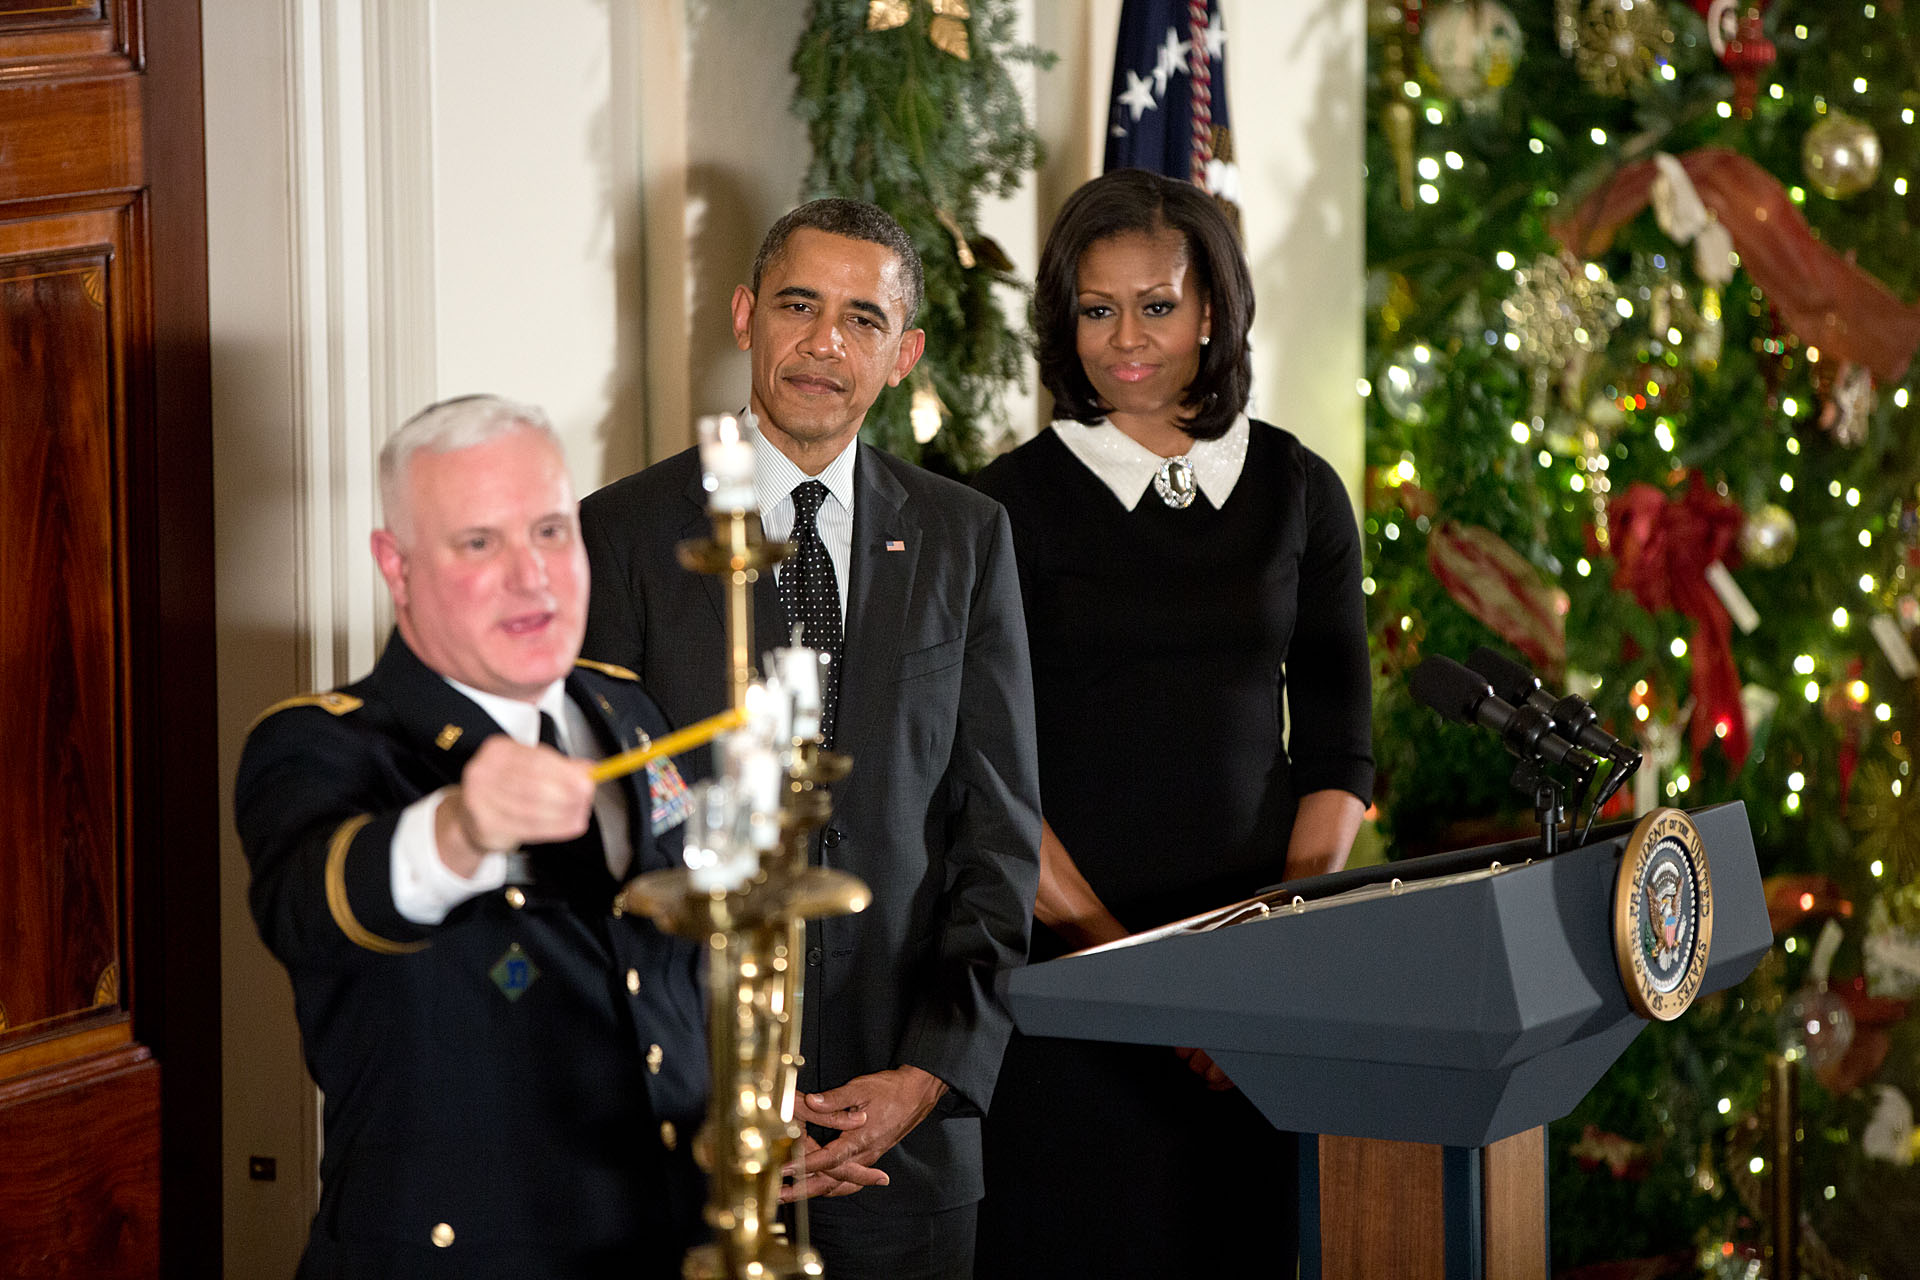 President Barack Obama, First Lady Michelle Obama, and Rabbi Larry Bazer participate in the Menorah lighting during the Hanukkah reception in the Grand Foyer of the White House, Dec. 13, 2012. (Official White House Photo by Pete Souza)